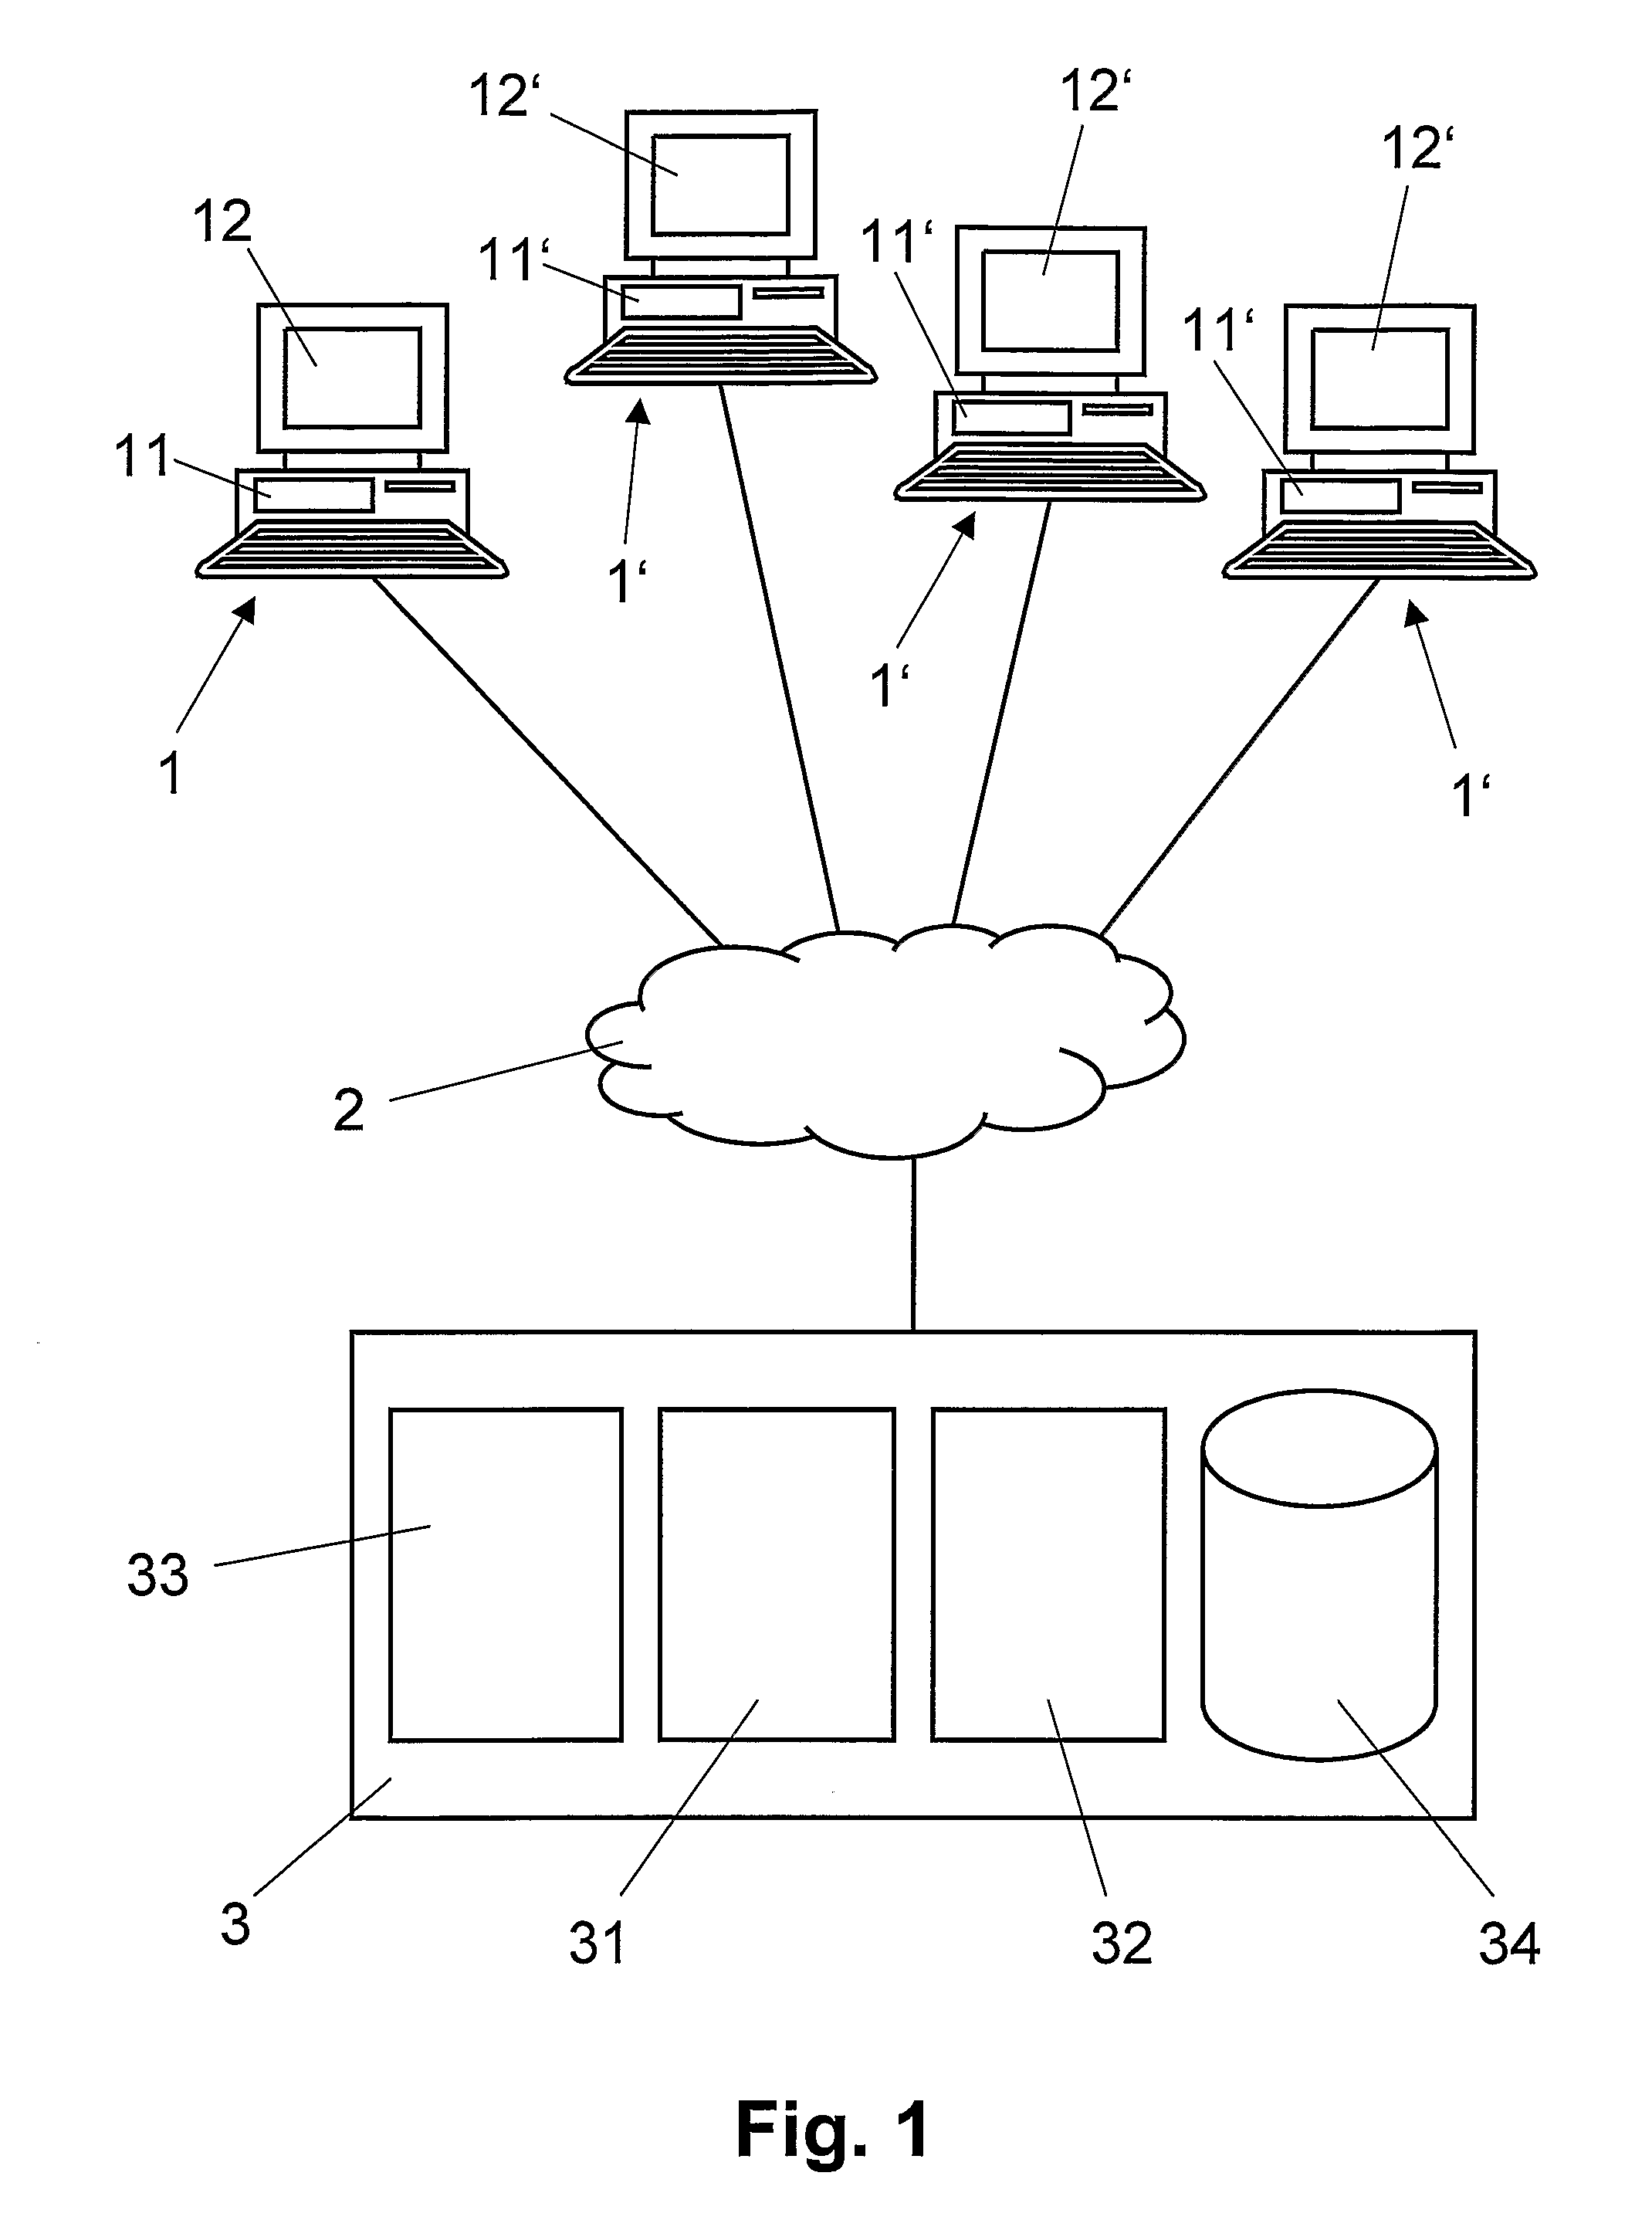 Computer-based system and computer program product for collaborative editing of documents